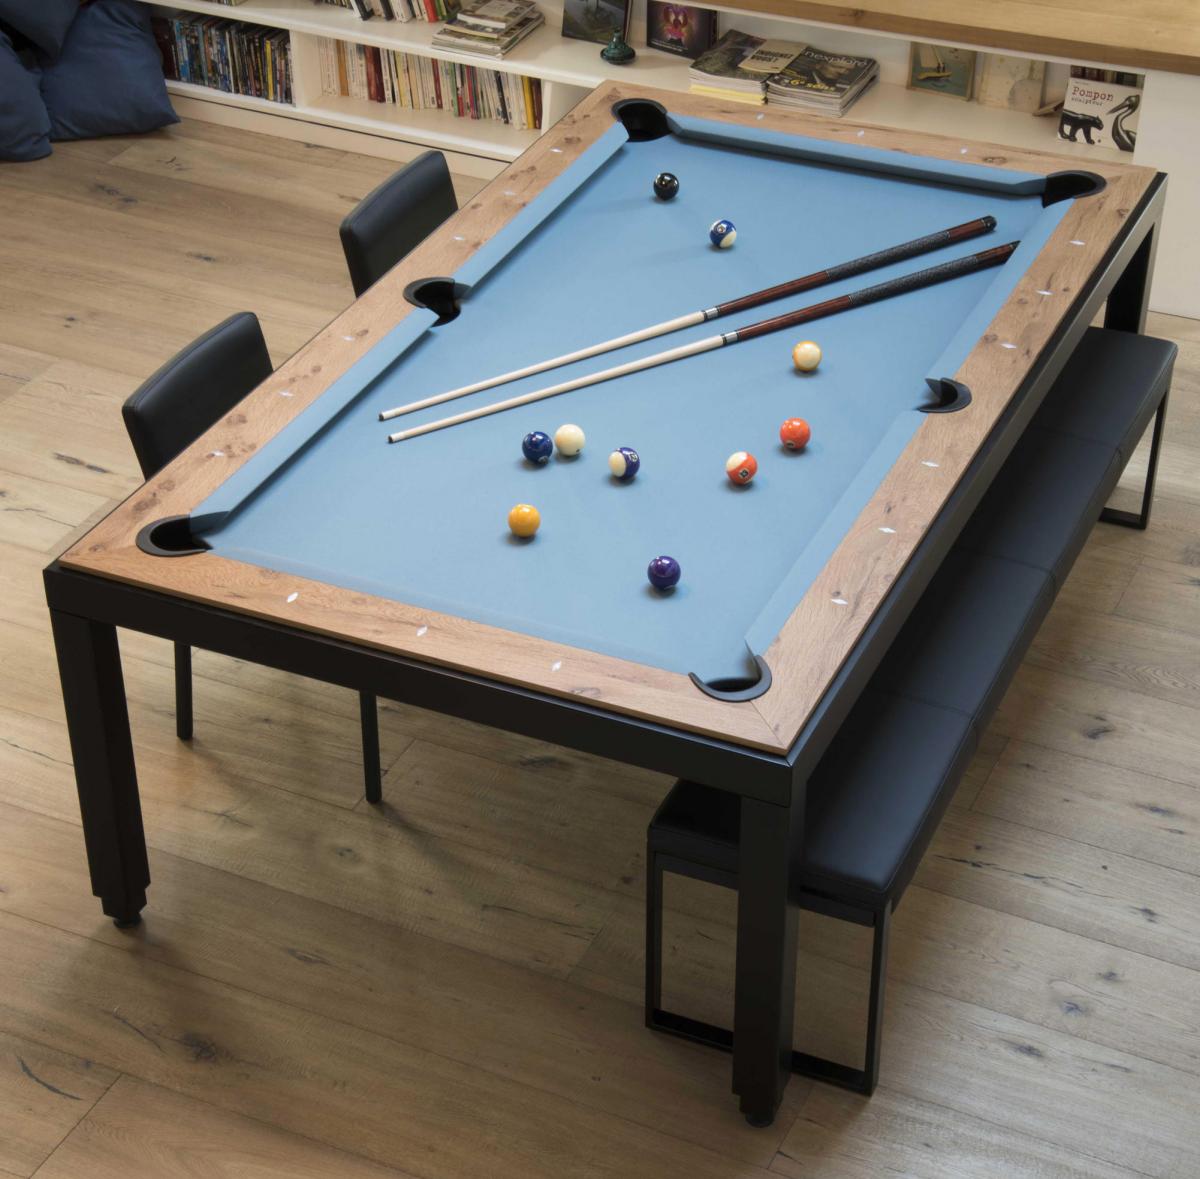 Fusion Pool Table - Multi-function dining table pool table - Incredible design unique billiard table